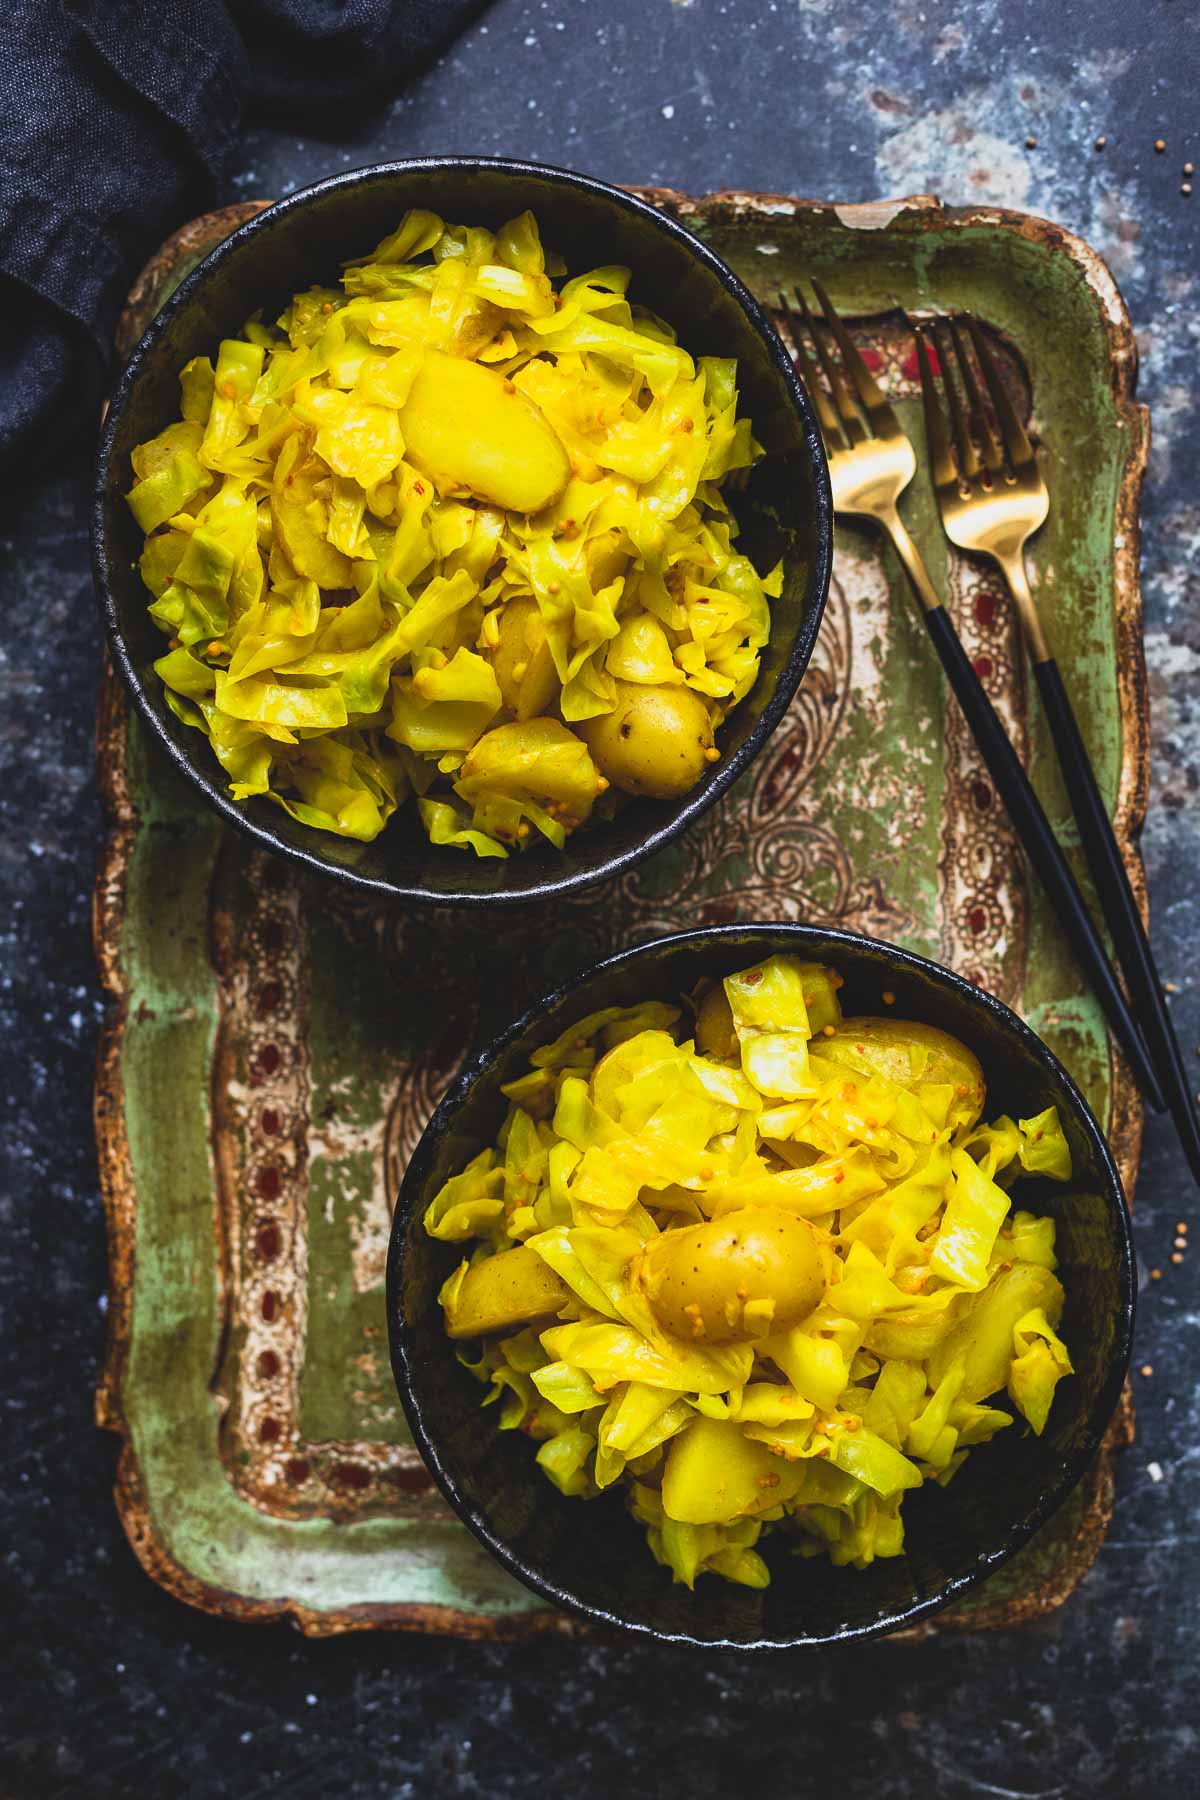 Pointed Cabbage Stir-fry with Potatoes (Bengali-Style)